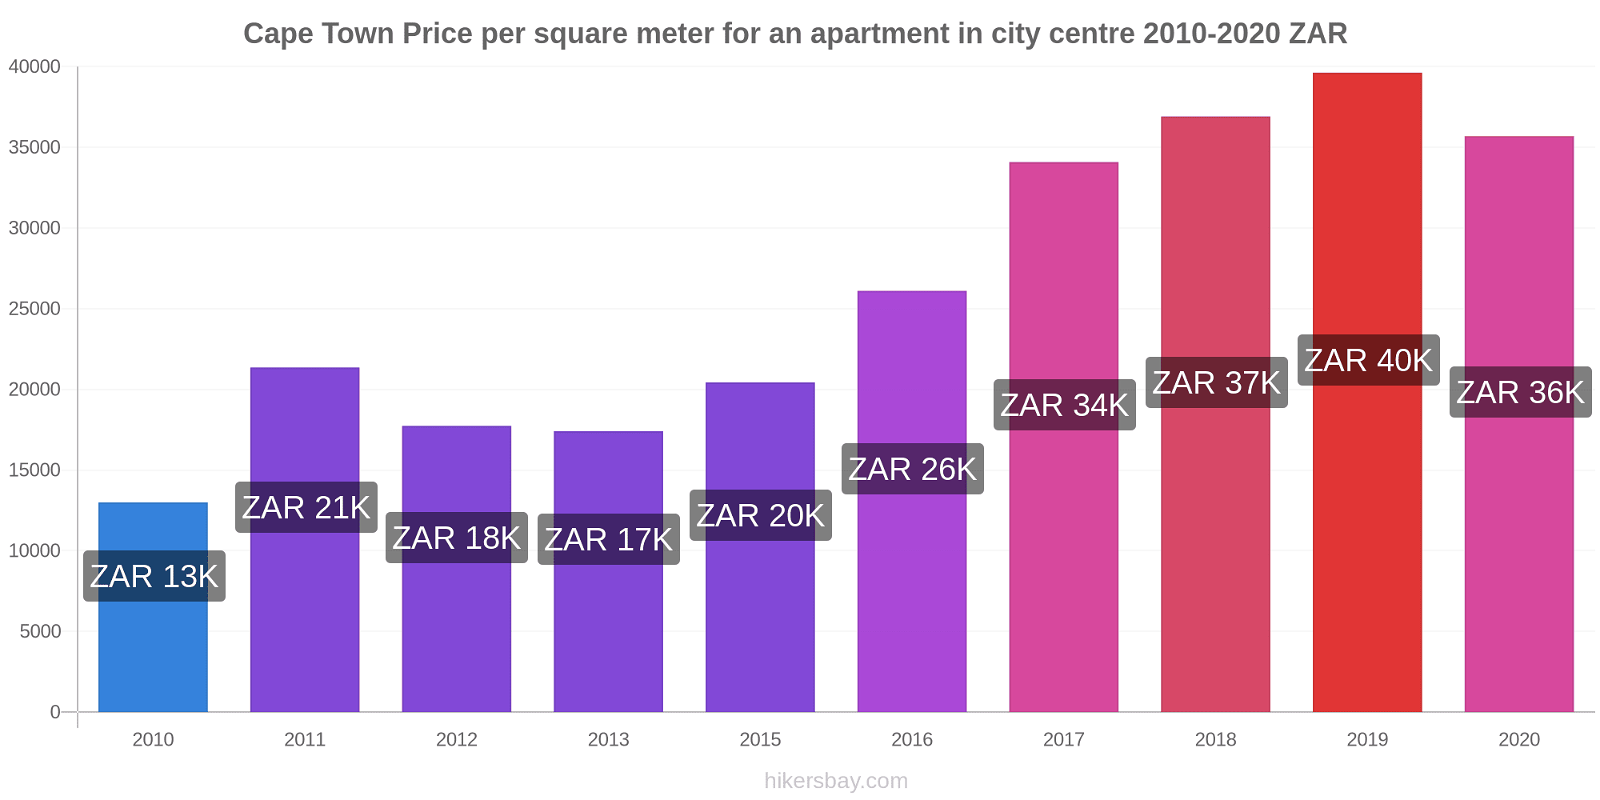 Cape Town price changes Price per square meter for an apartment in city centre hikersbay.com